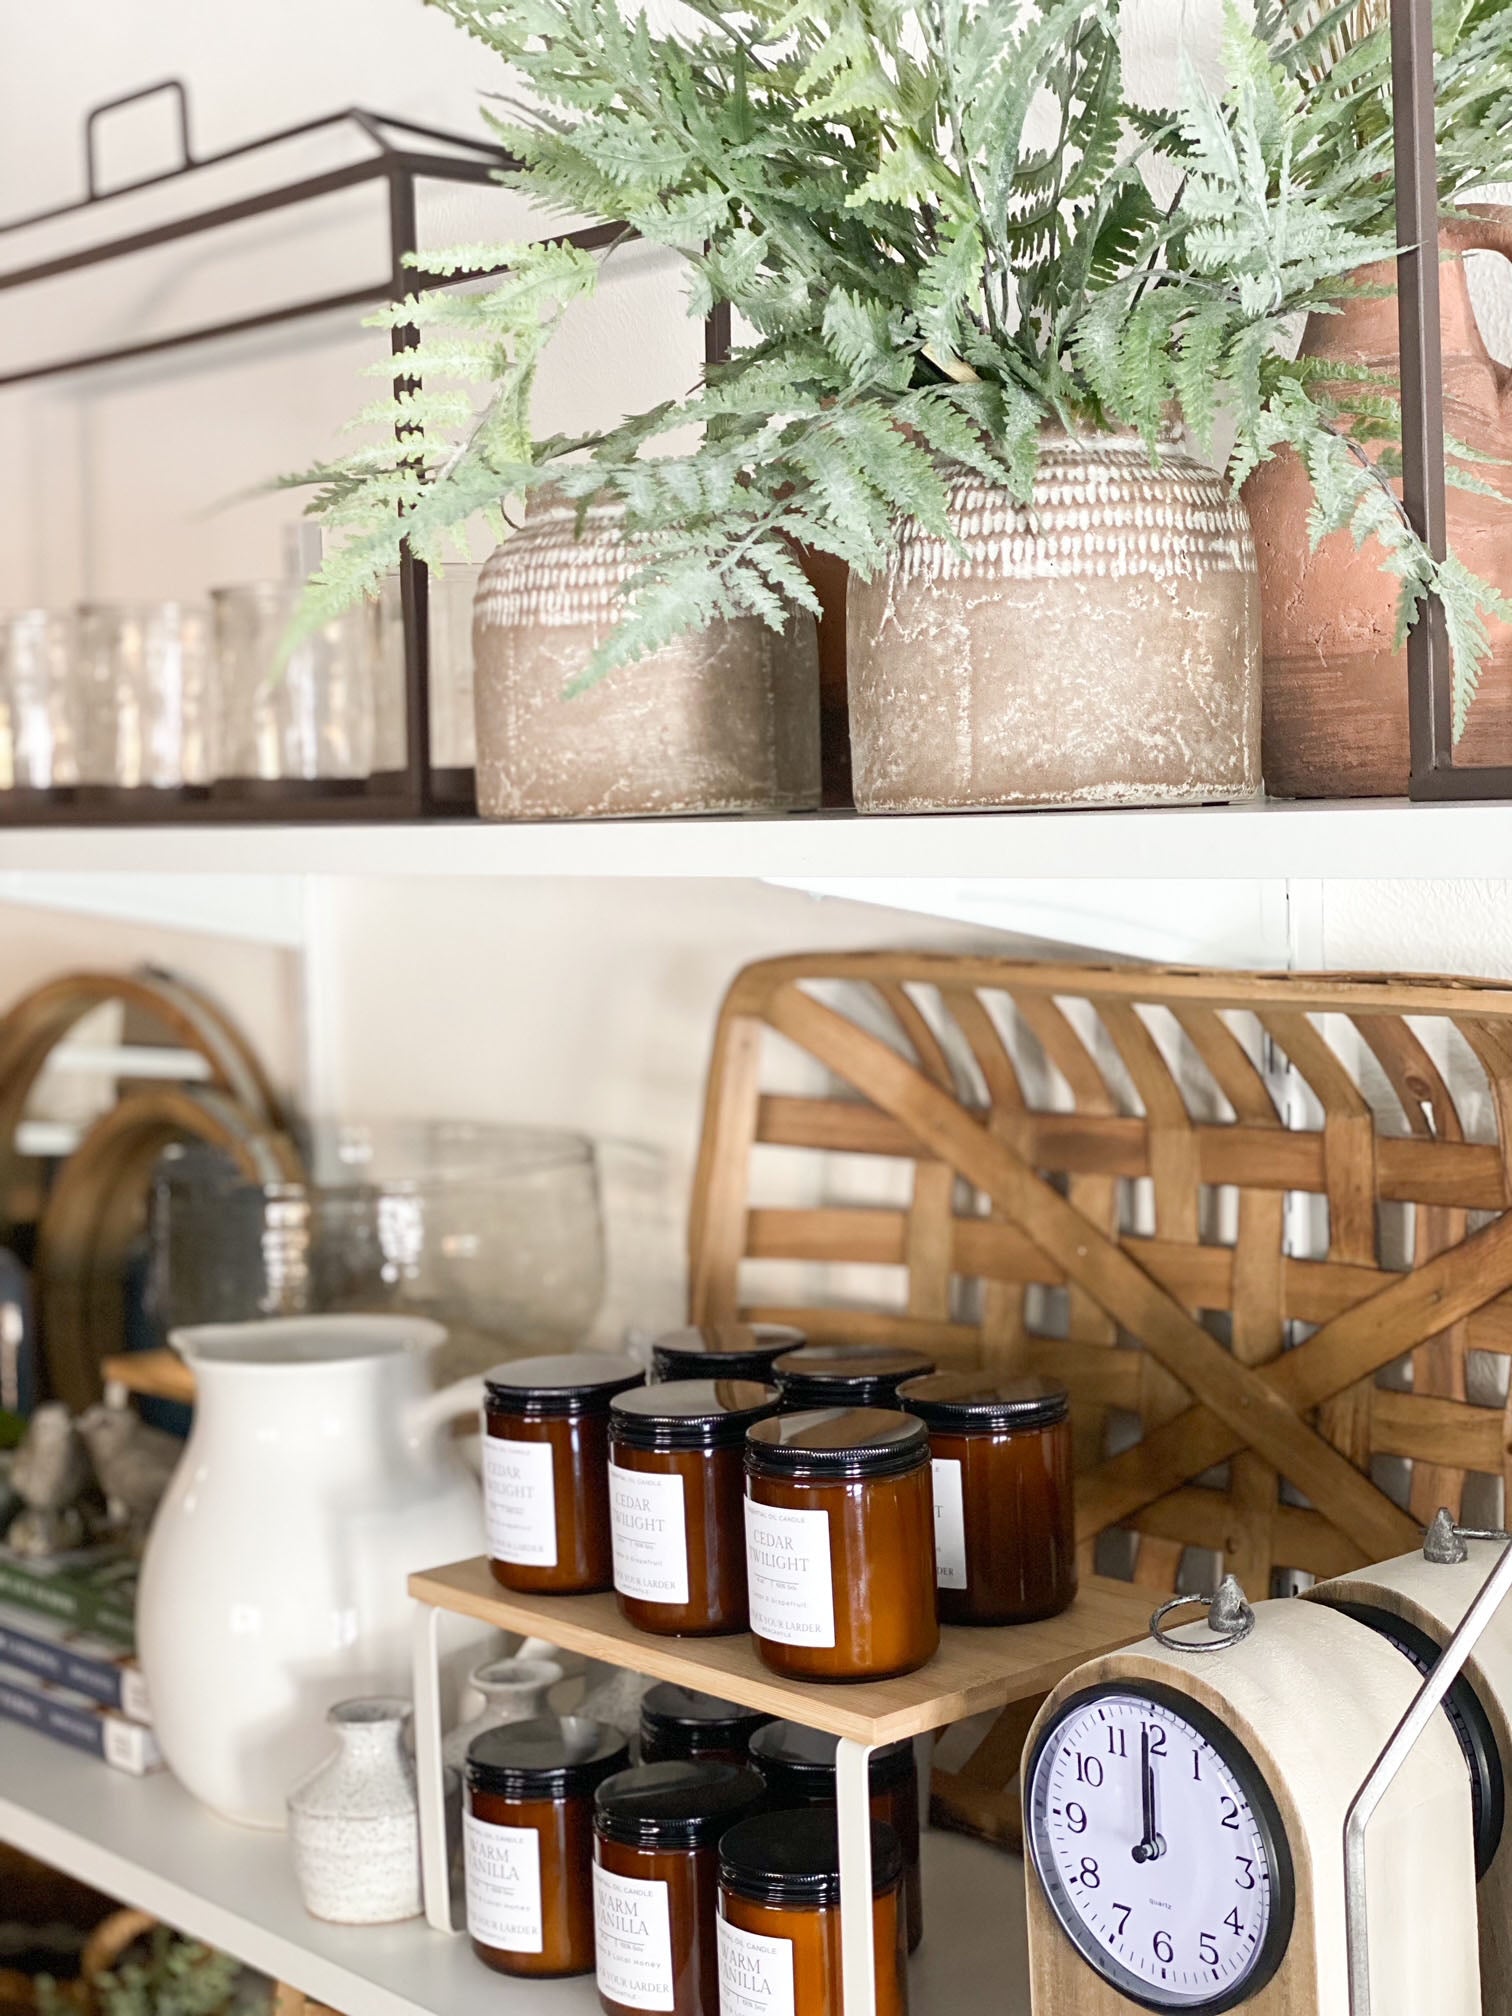 Retail shelves with home decor and candle at Homestead retail shop, image credit Bonnie at Homestead